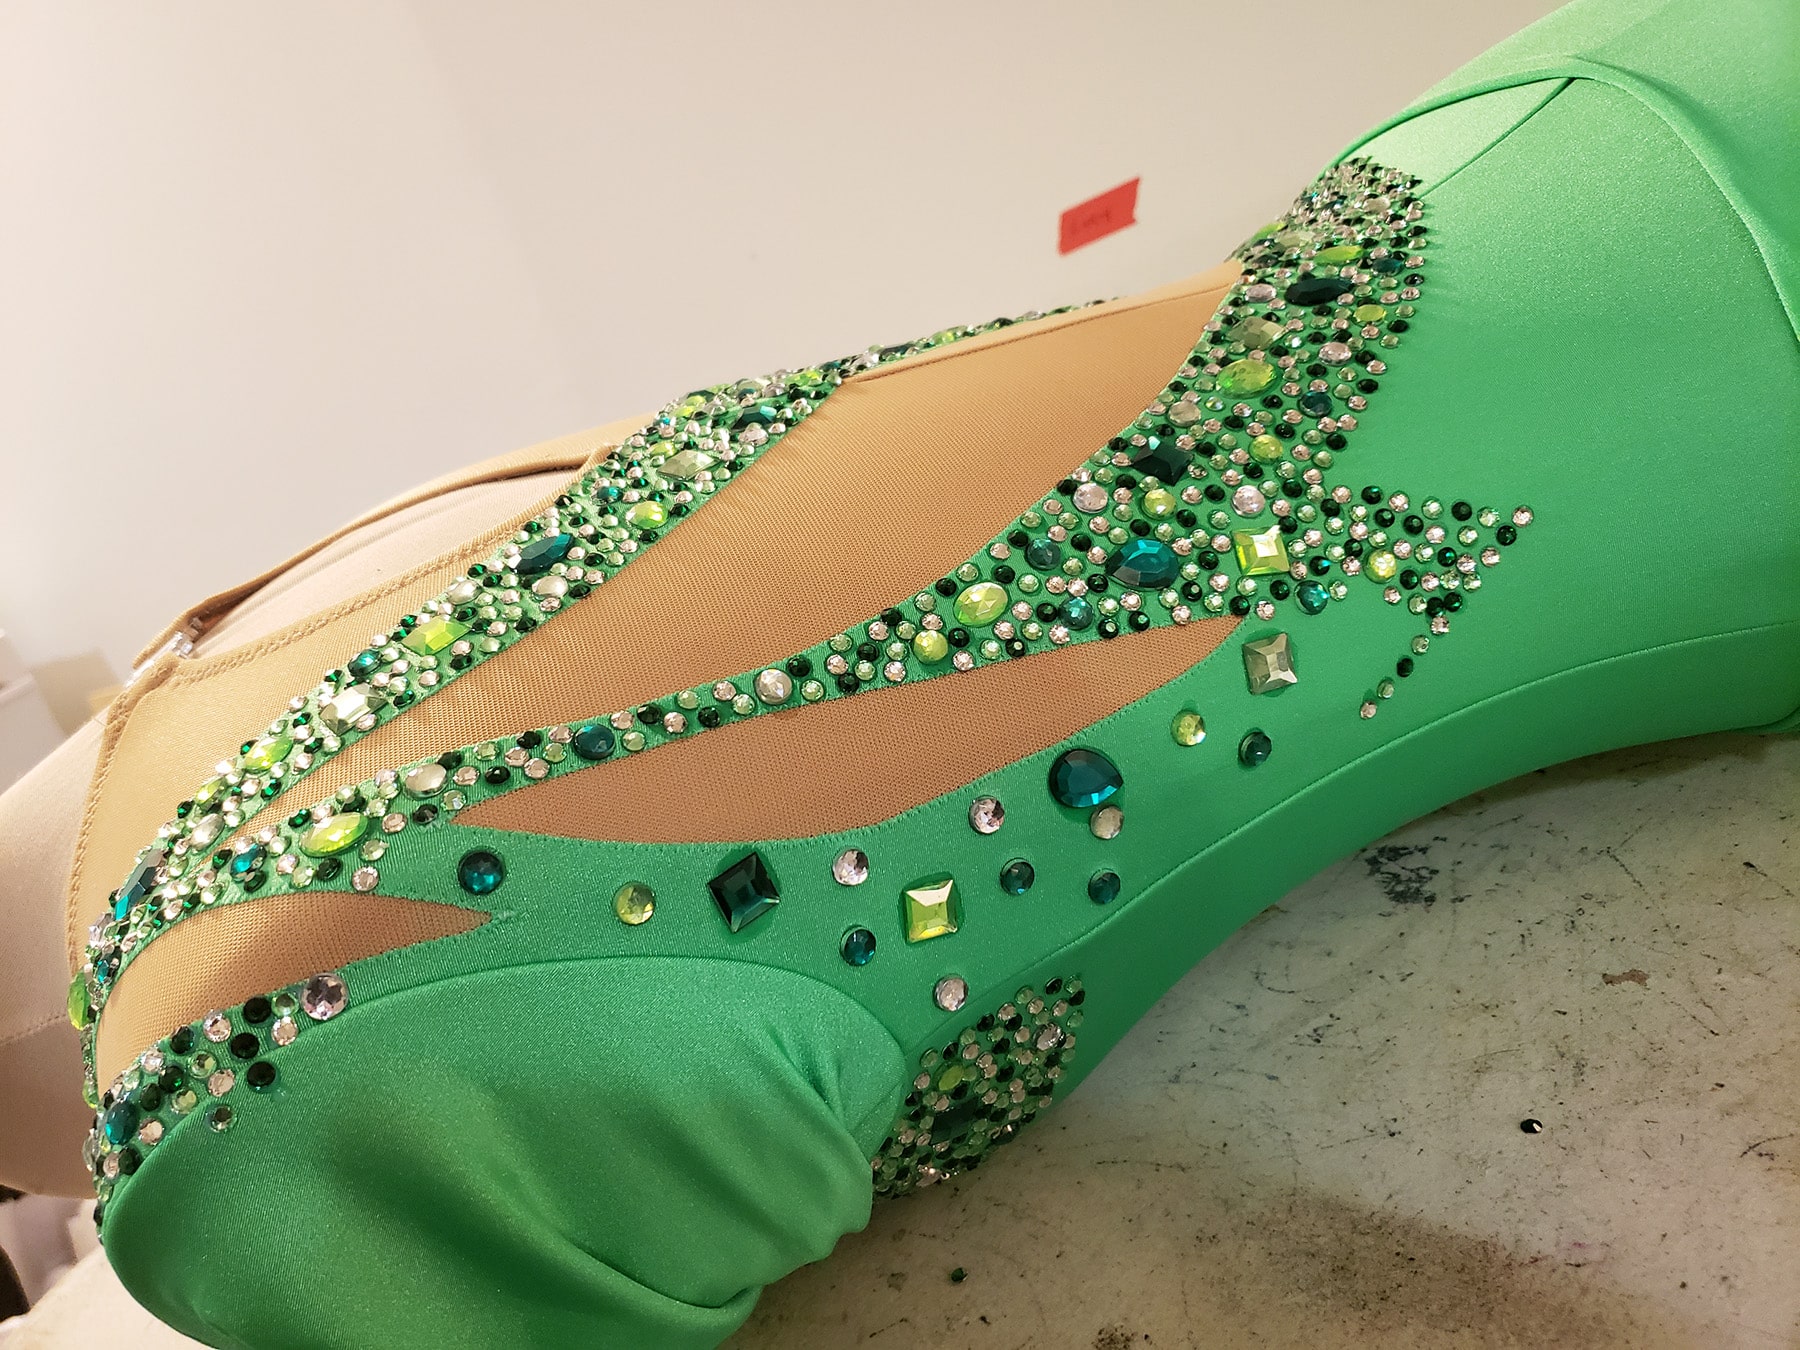 A green skating dress on a dress form, with large rhinestones glued on. The rhinestones are clear and various shades of green, in a variety of shapes and sizes.